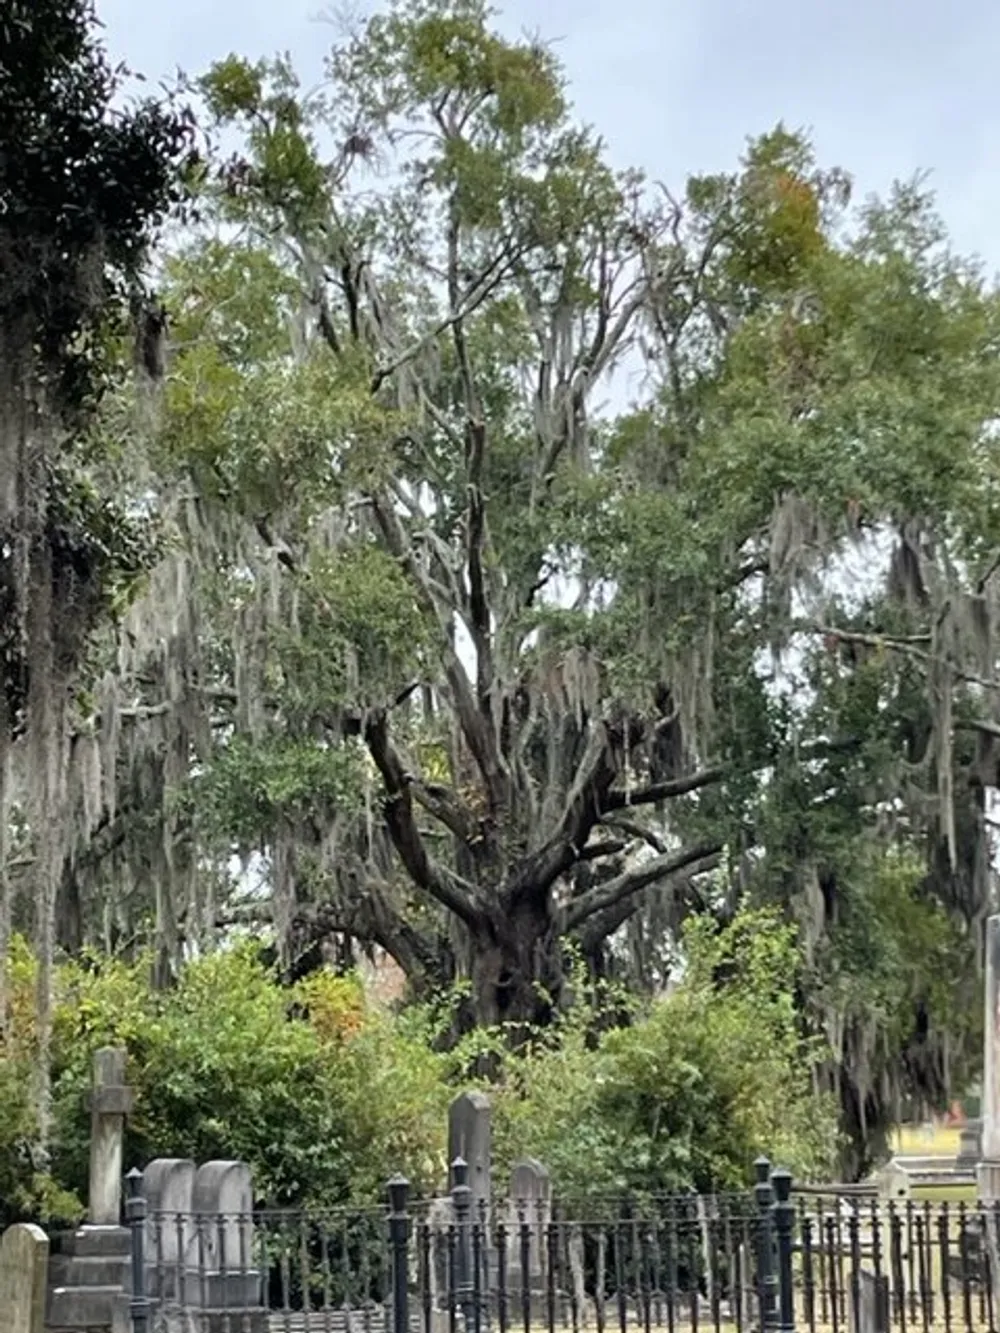 The image captures a majestic ancient tree draped with Spanish moss standing sentinel over a historic cemetery with wrought iron fencing